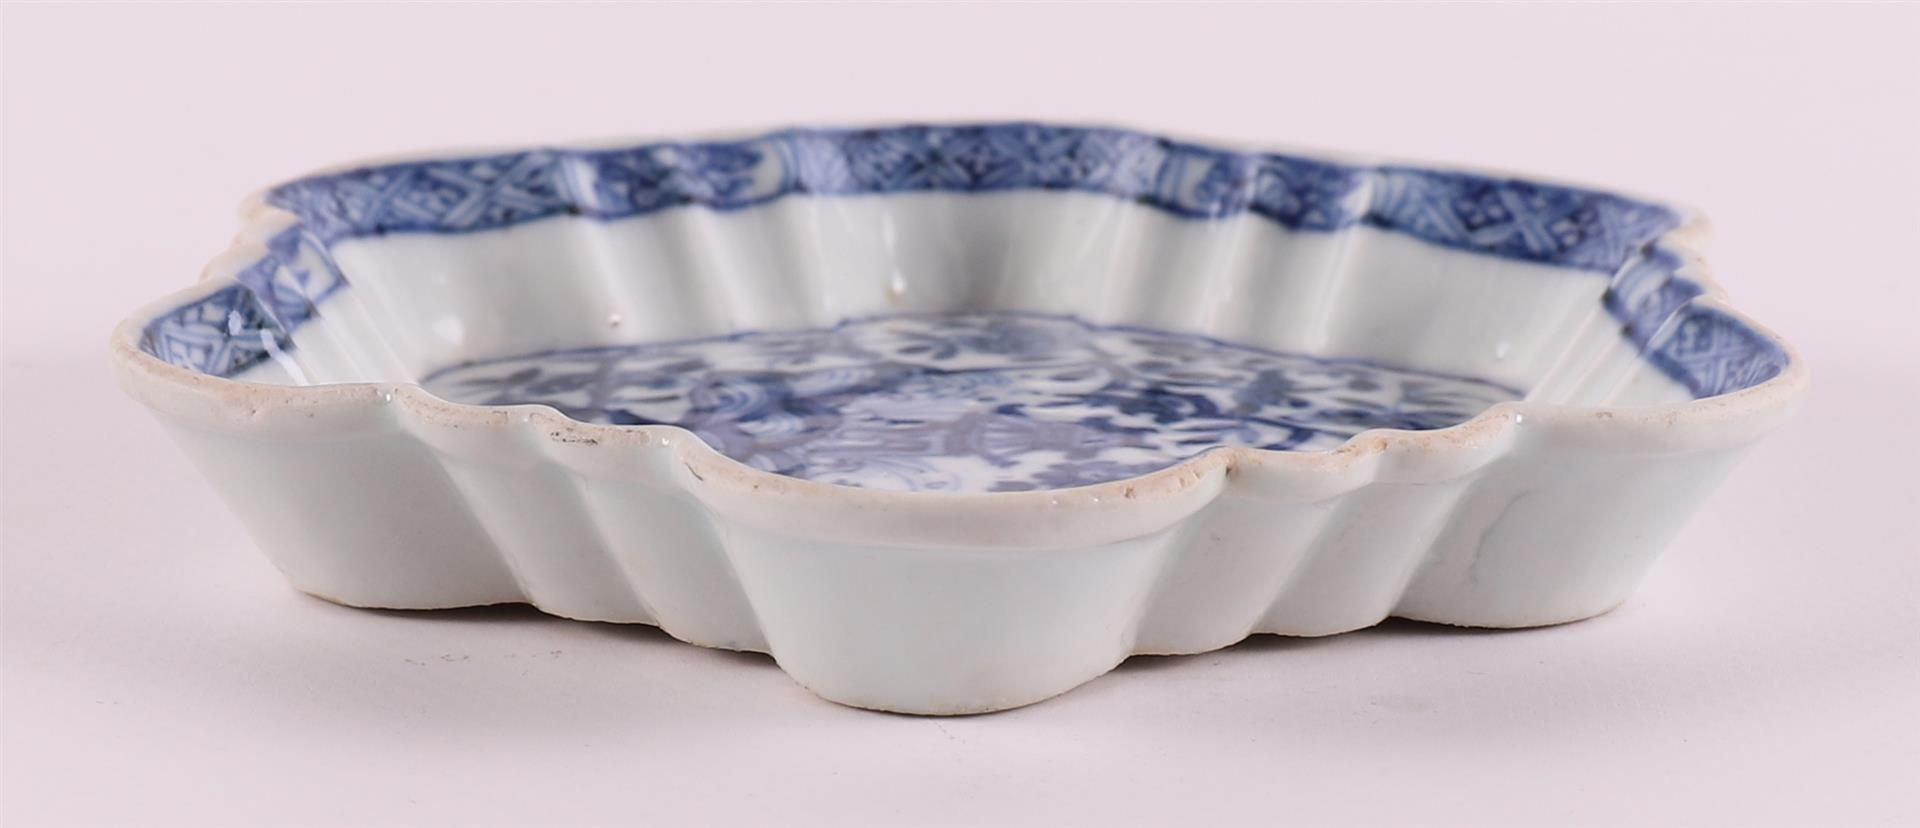 A blue/white scalloped porcelain pattipan, China, Younzheng, 18th century. - Image 3 of 5